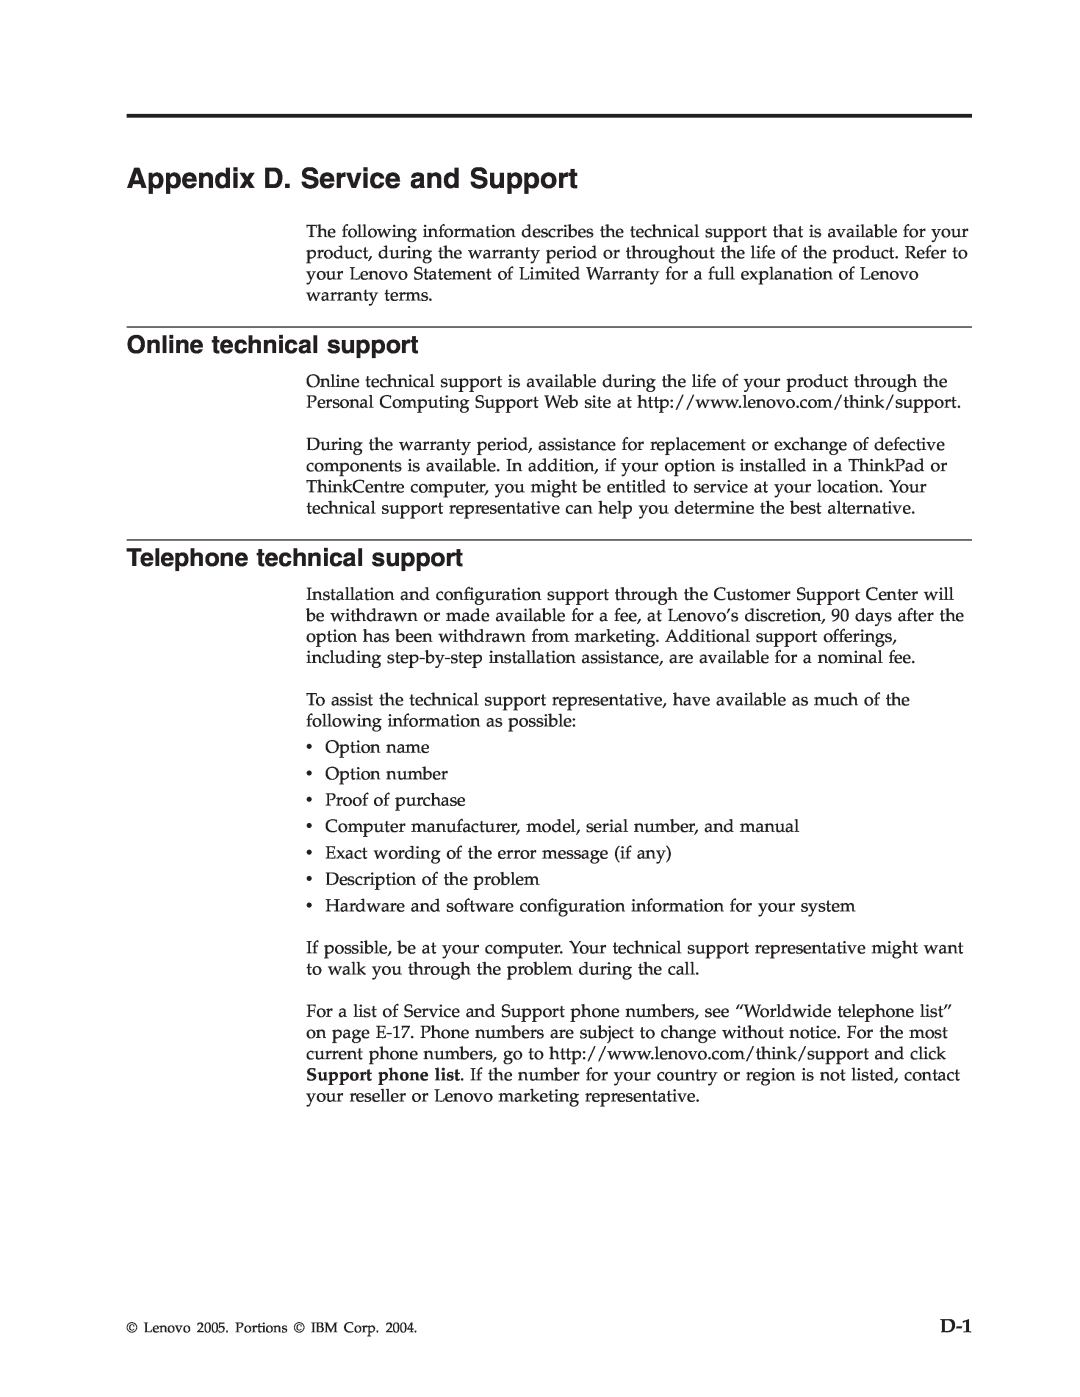 Lenovo C400 manual Appendix D. Service and Support, Online technical support, Telephone technical support 